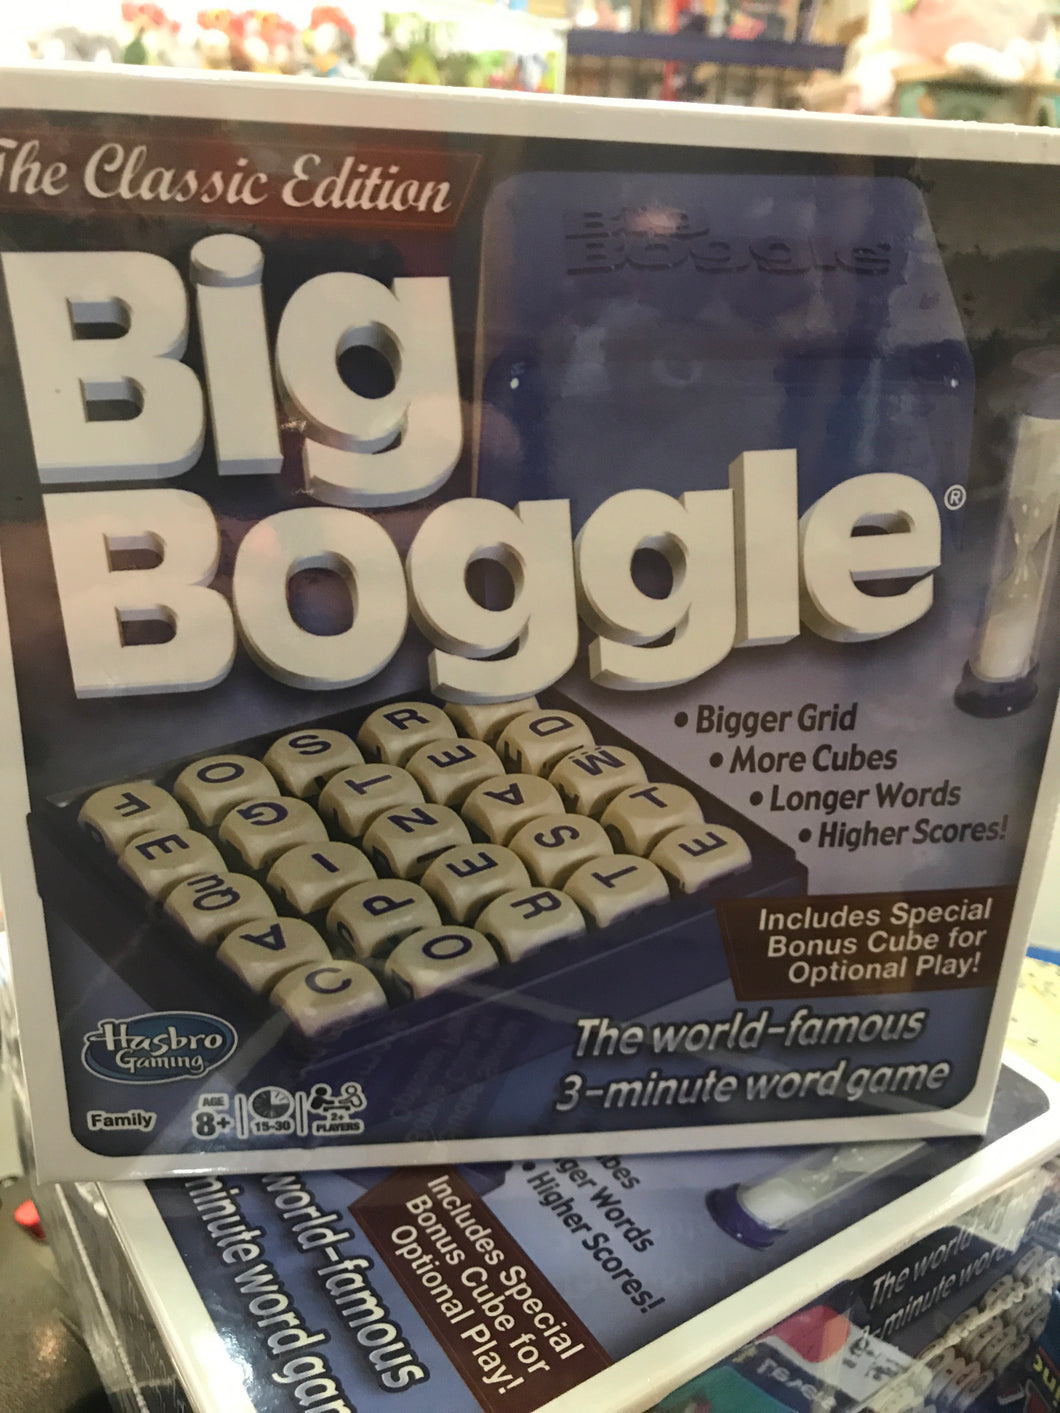 Big Boggle - The Classic Edition